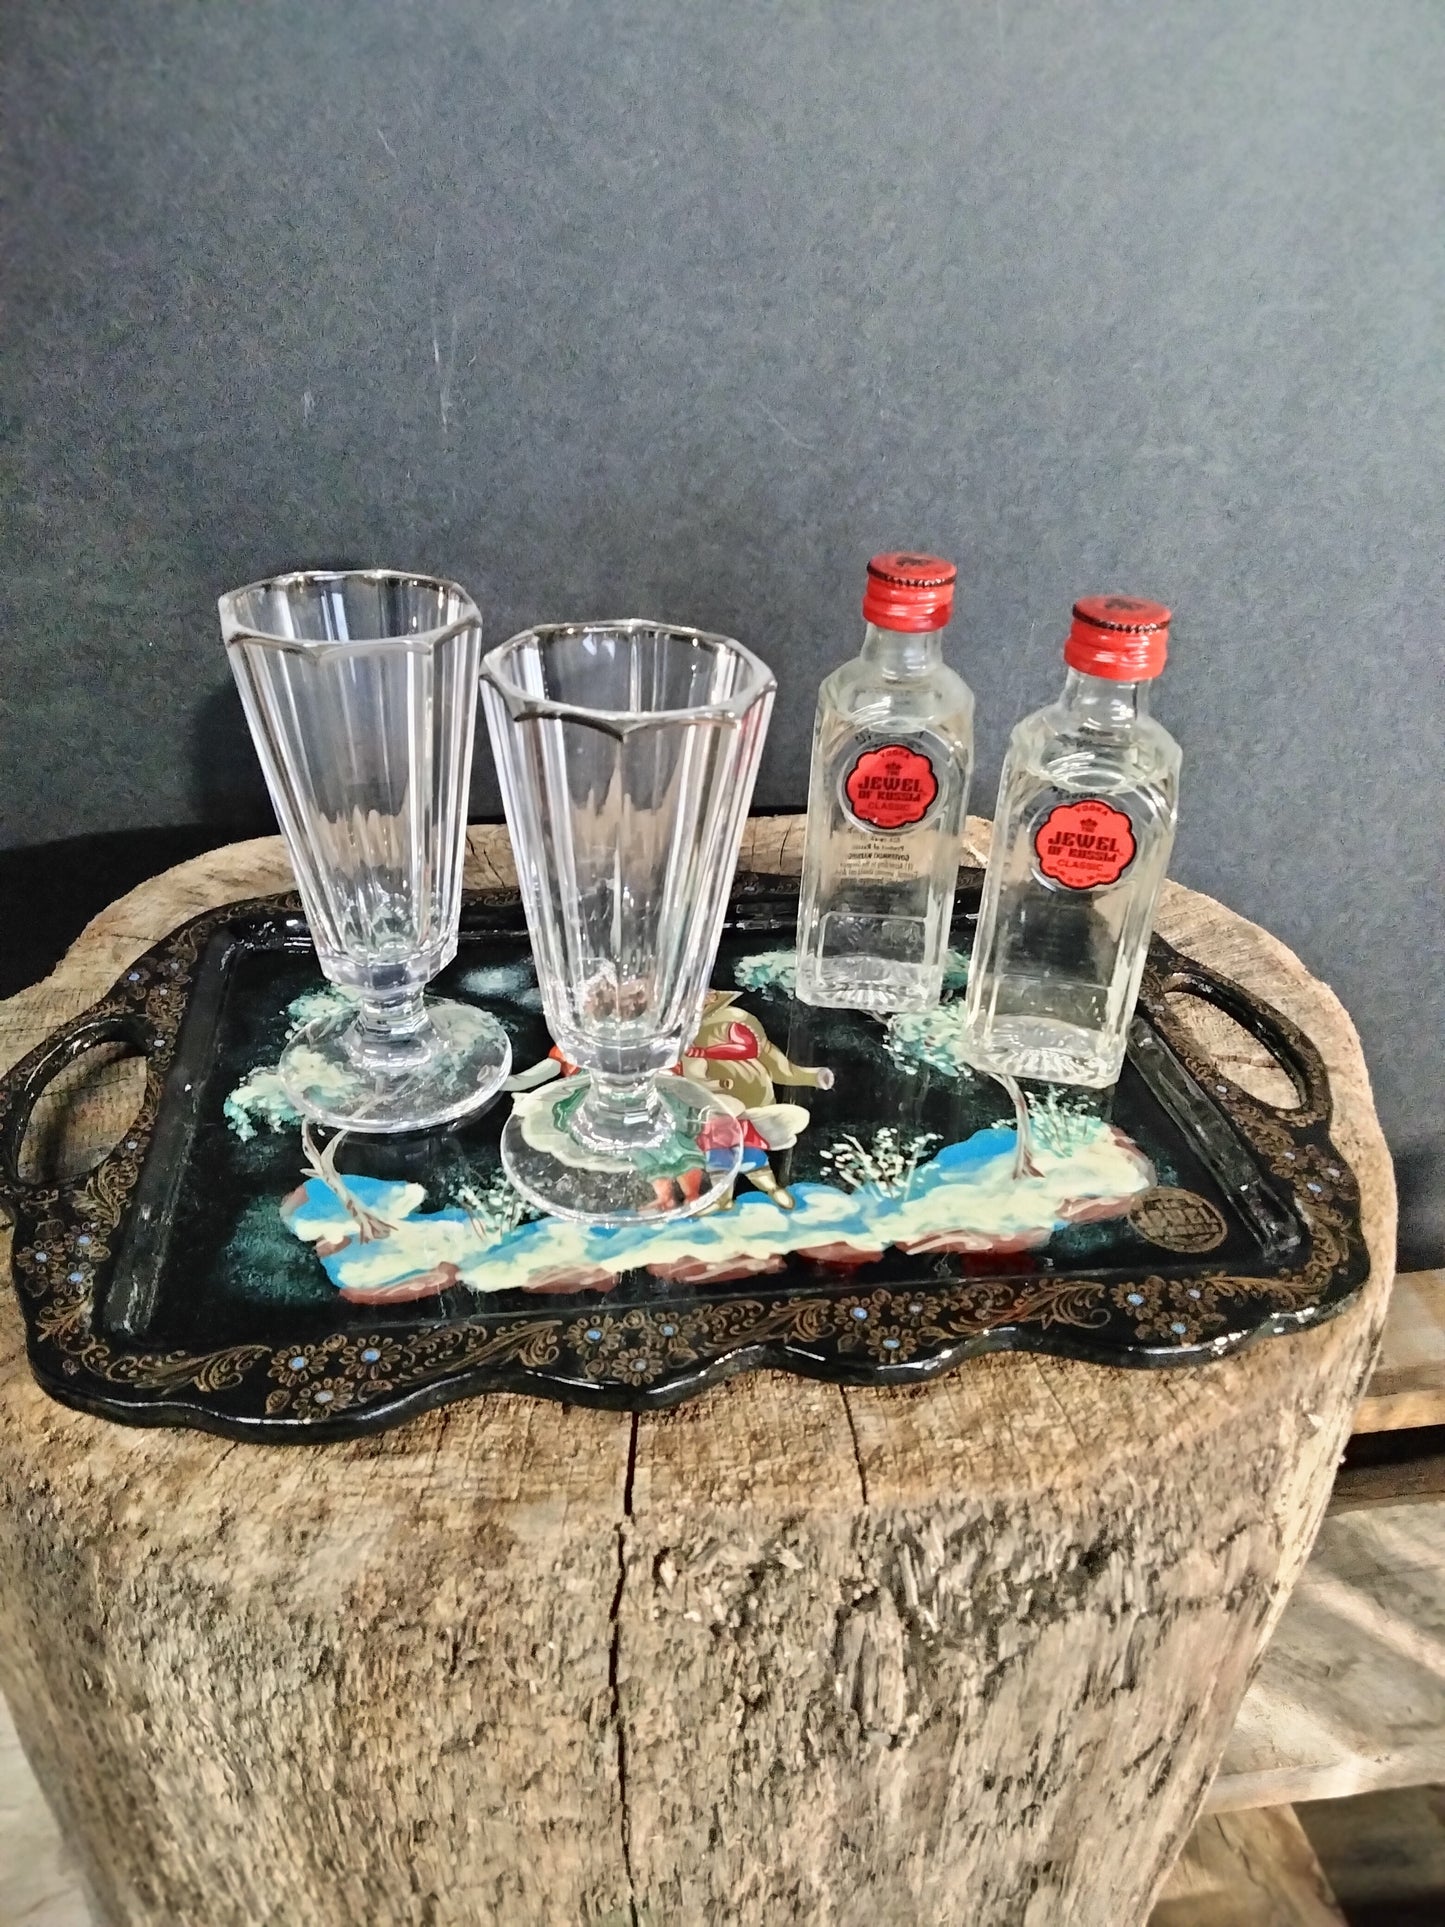 Teh Jewel Of Russia traditional hand painted Palekh lacquer miniature vodka shot serving tray